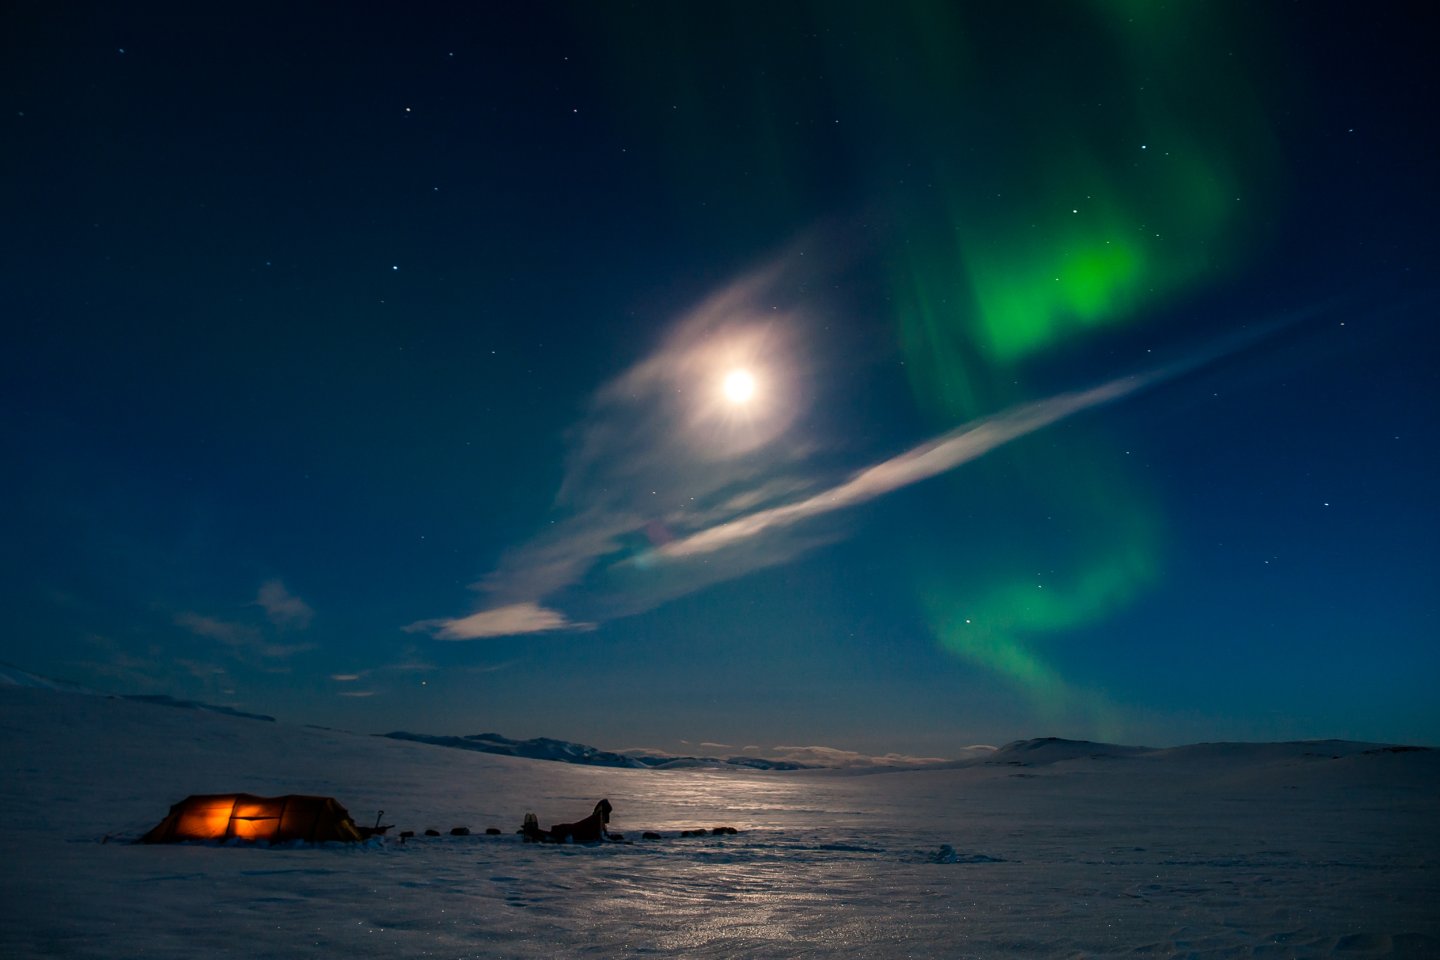 Northern lights with fullmoon